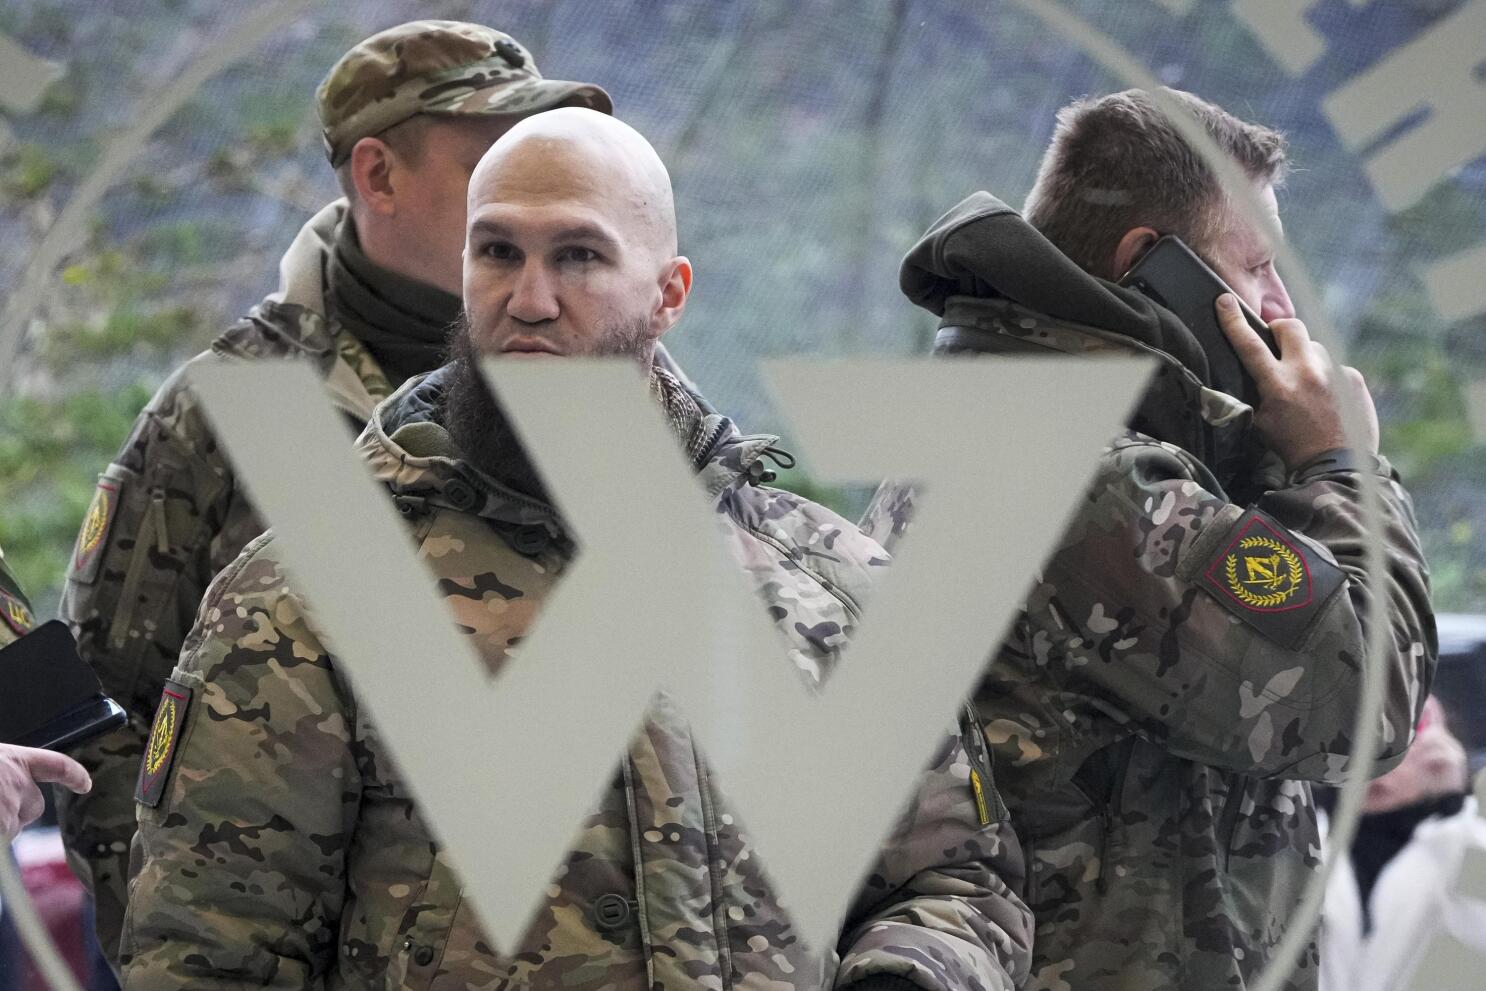 Russian officials are denying ammunition to Wagner fighters - group founder